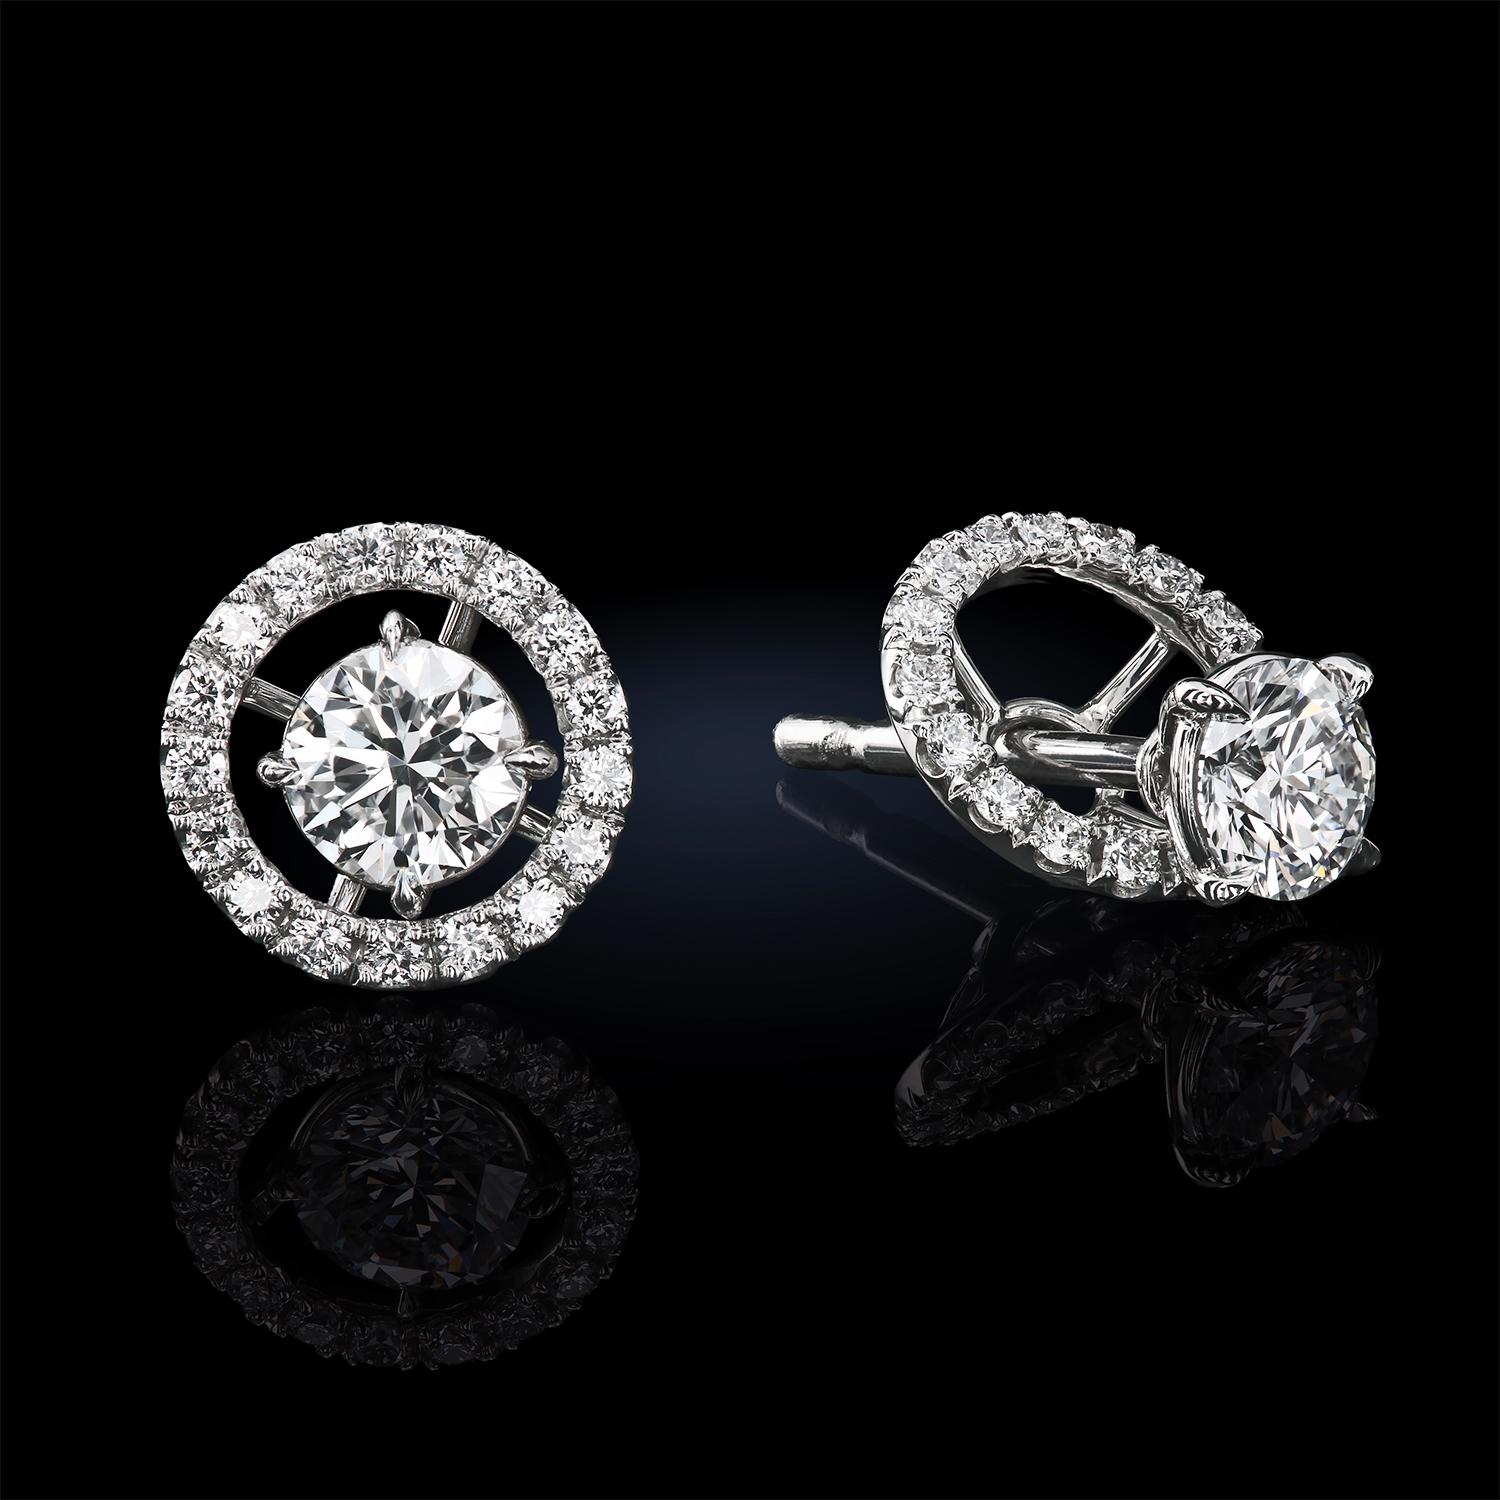 Leon Mege everlasting four-prong martini studs with removable diamond jackets. Approximately 0.30-carat each, the micro pave jacket's outside diameter is approximately 8 mm.
Natural F/VS diamonds approximately 0.90 carat total weight.